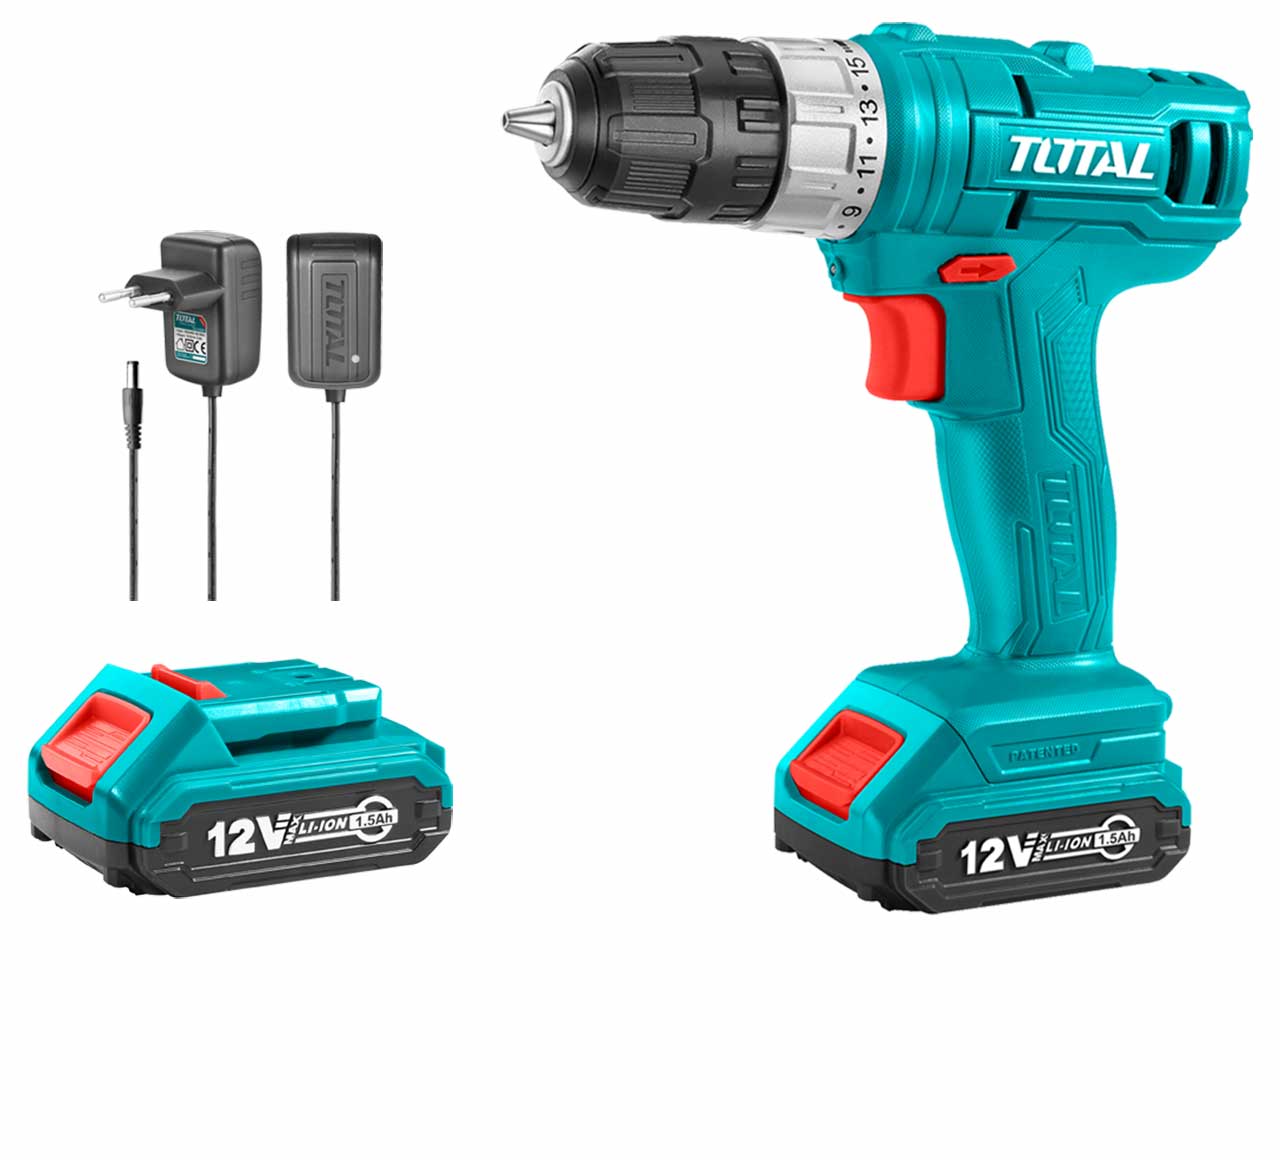 Who Invented Cordless Power Tools